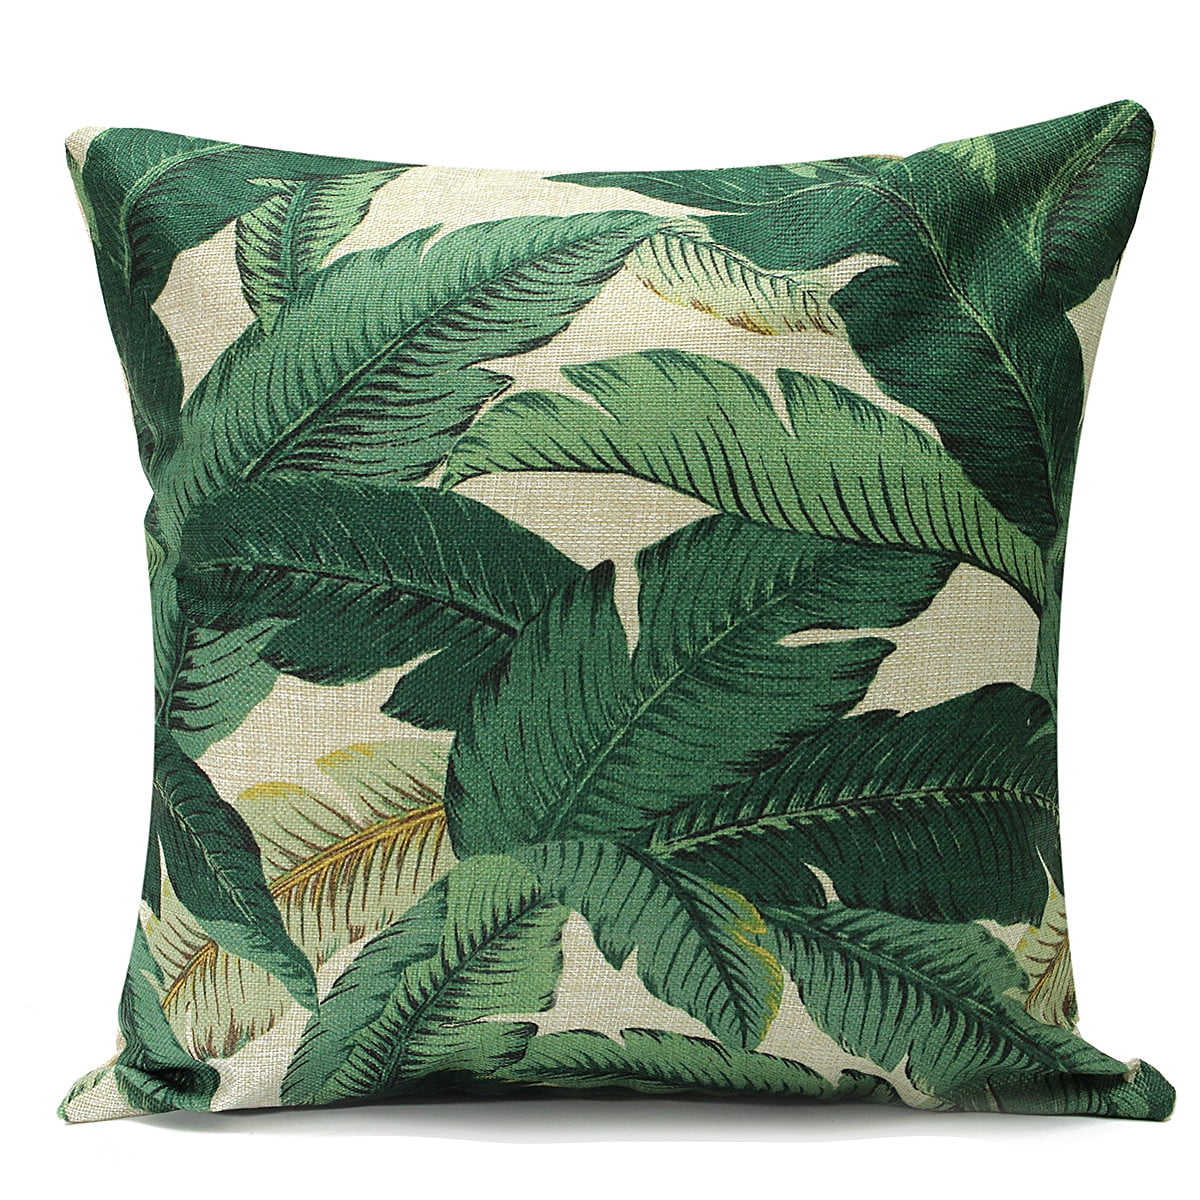 Tropical Leaves Pattern Cushion Cover Throw Pillow Case Bed Decor Square 18x18" 